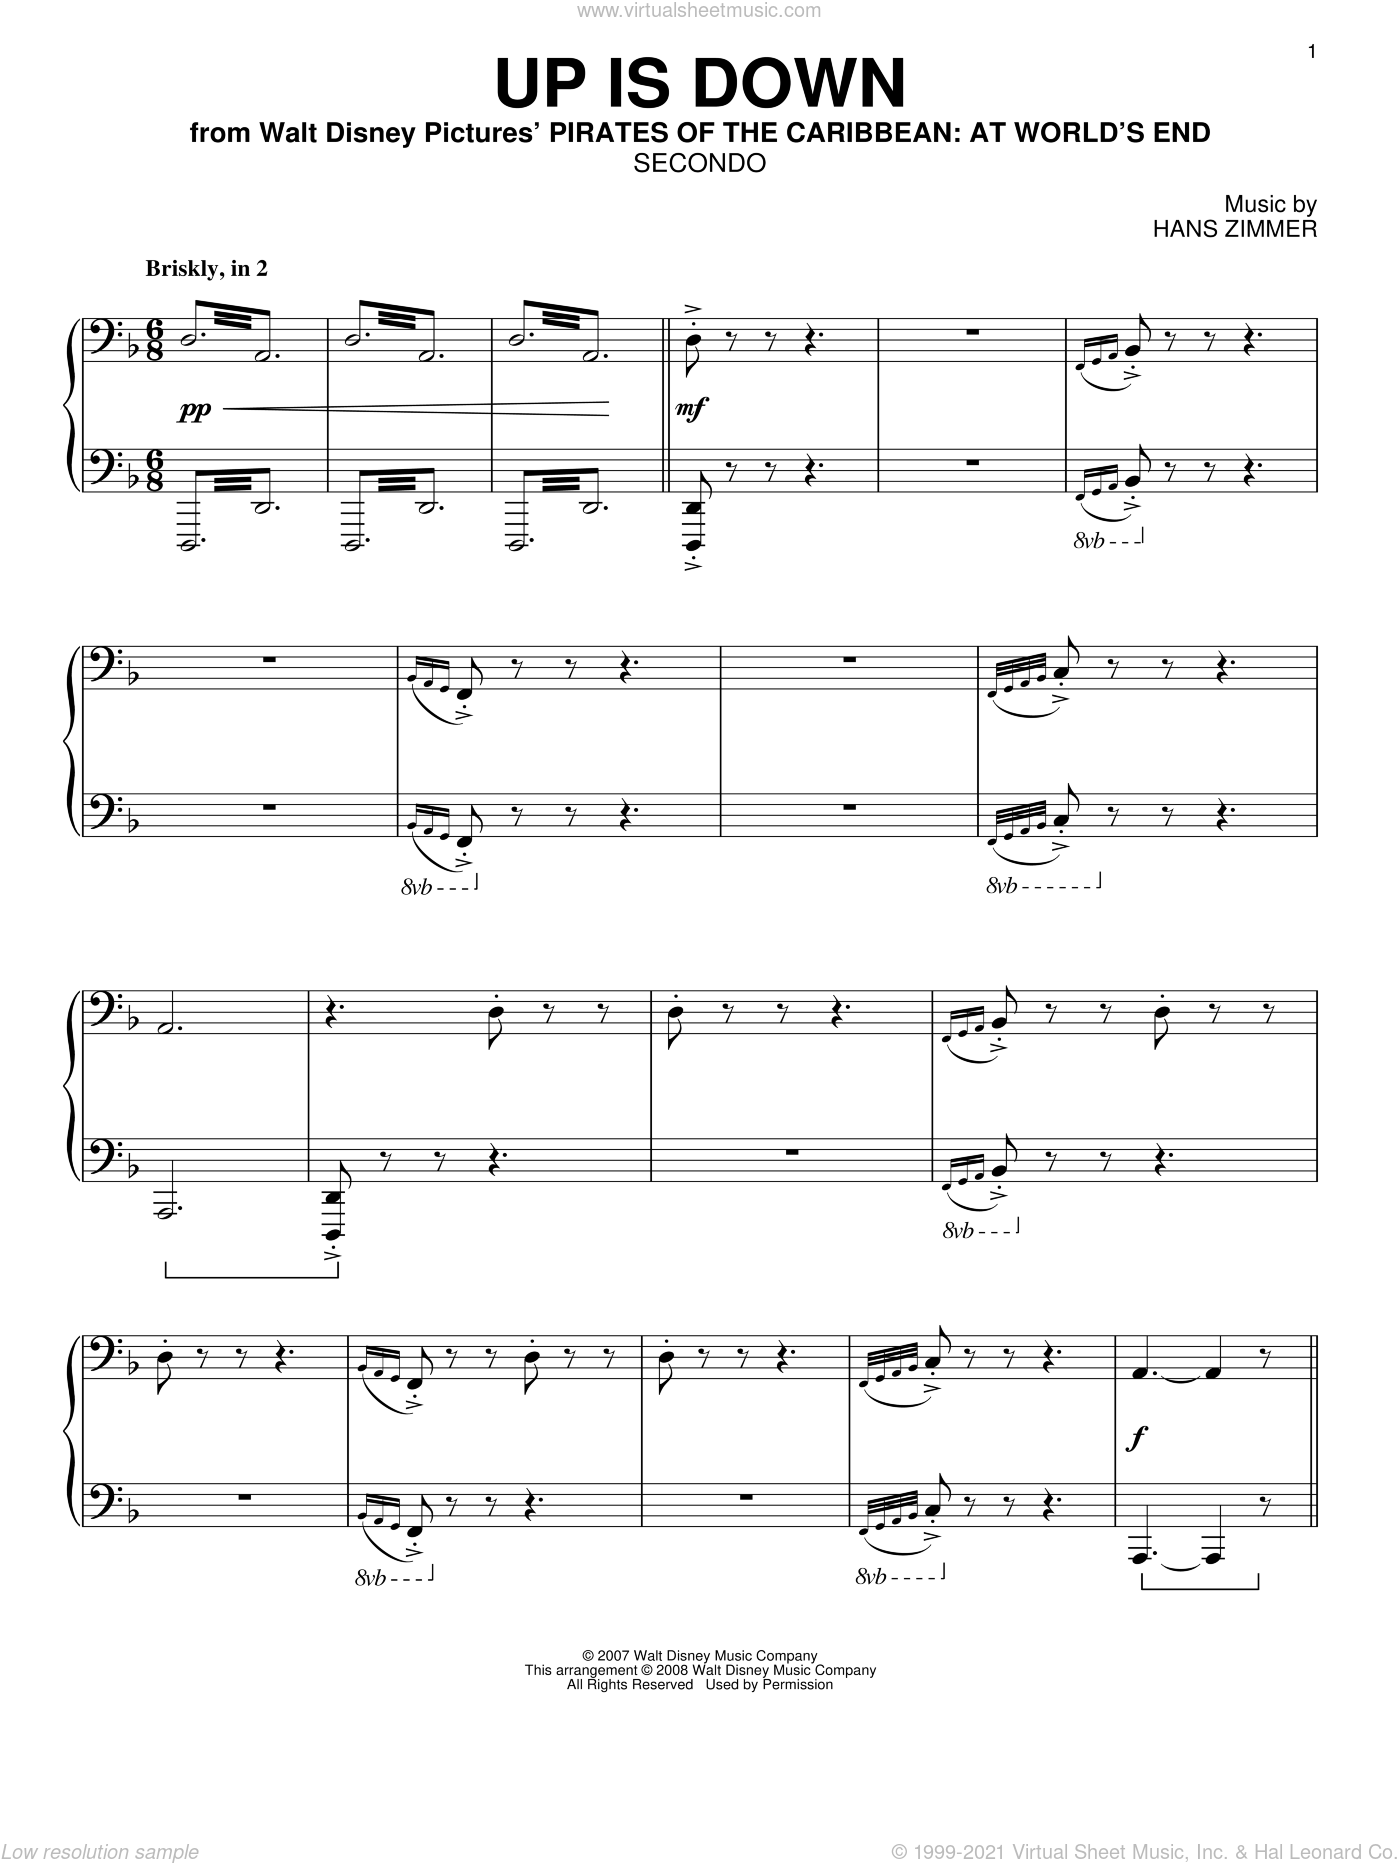 Zimmer Up Is Down From Pirates Of The Caribbean At World S End Sheet Music For Piano Four Hands